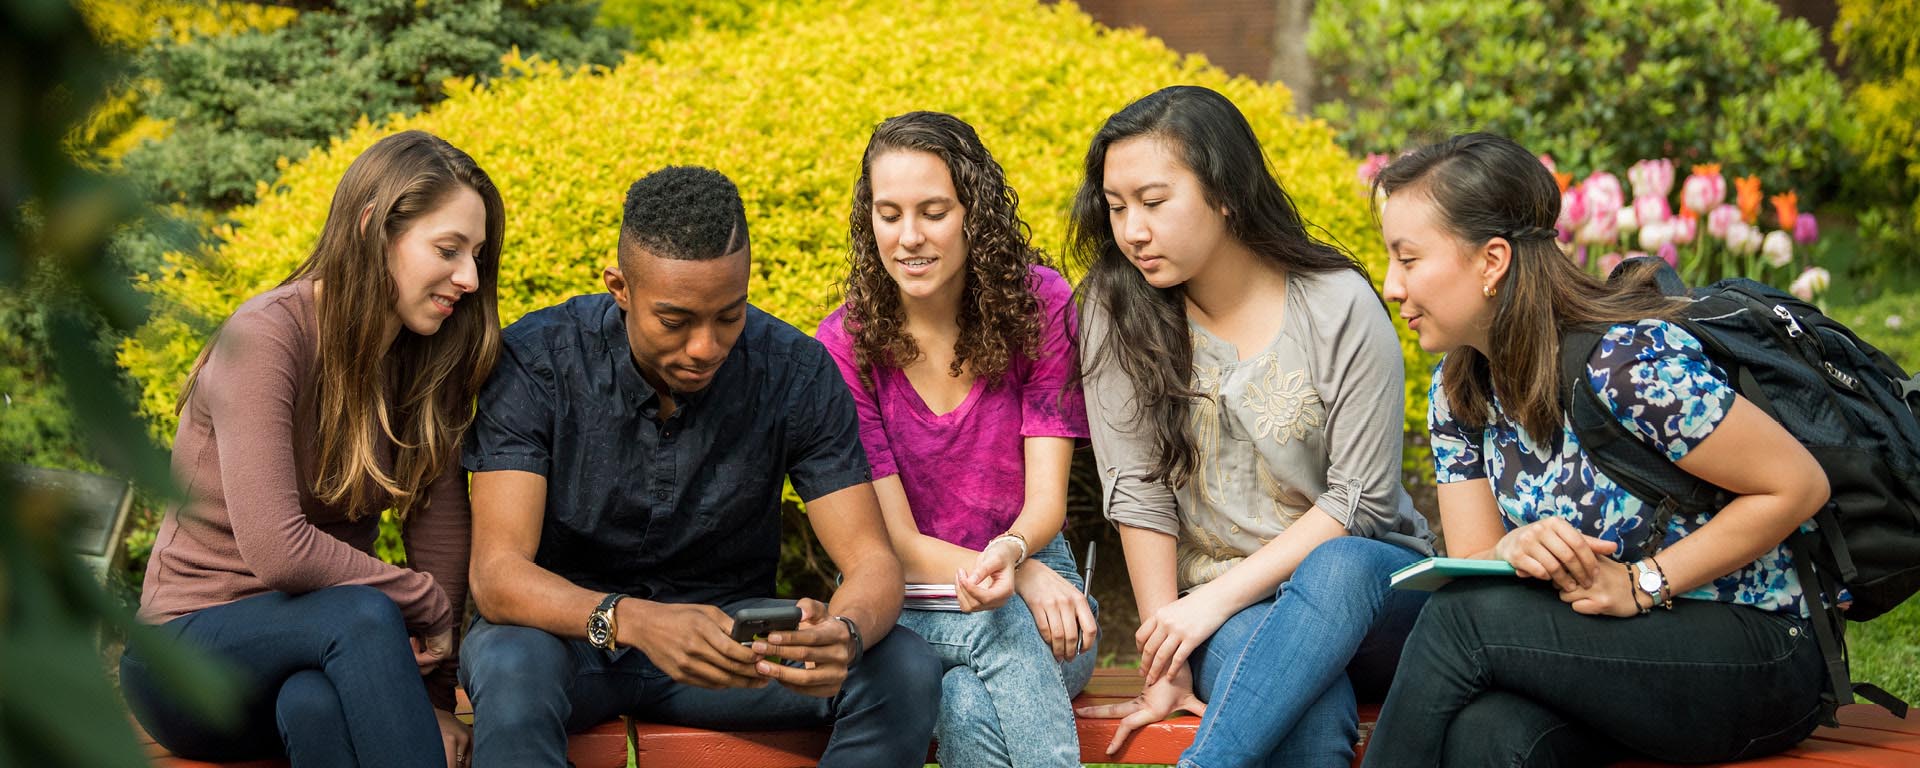 Five students sitting on an outdoor bench looking at one student's phone